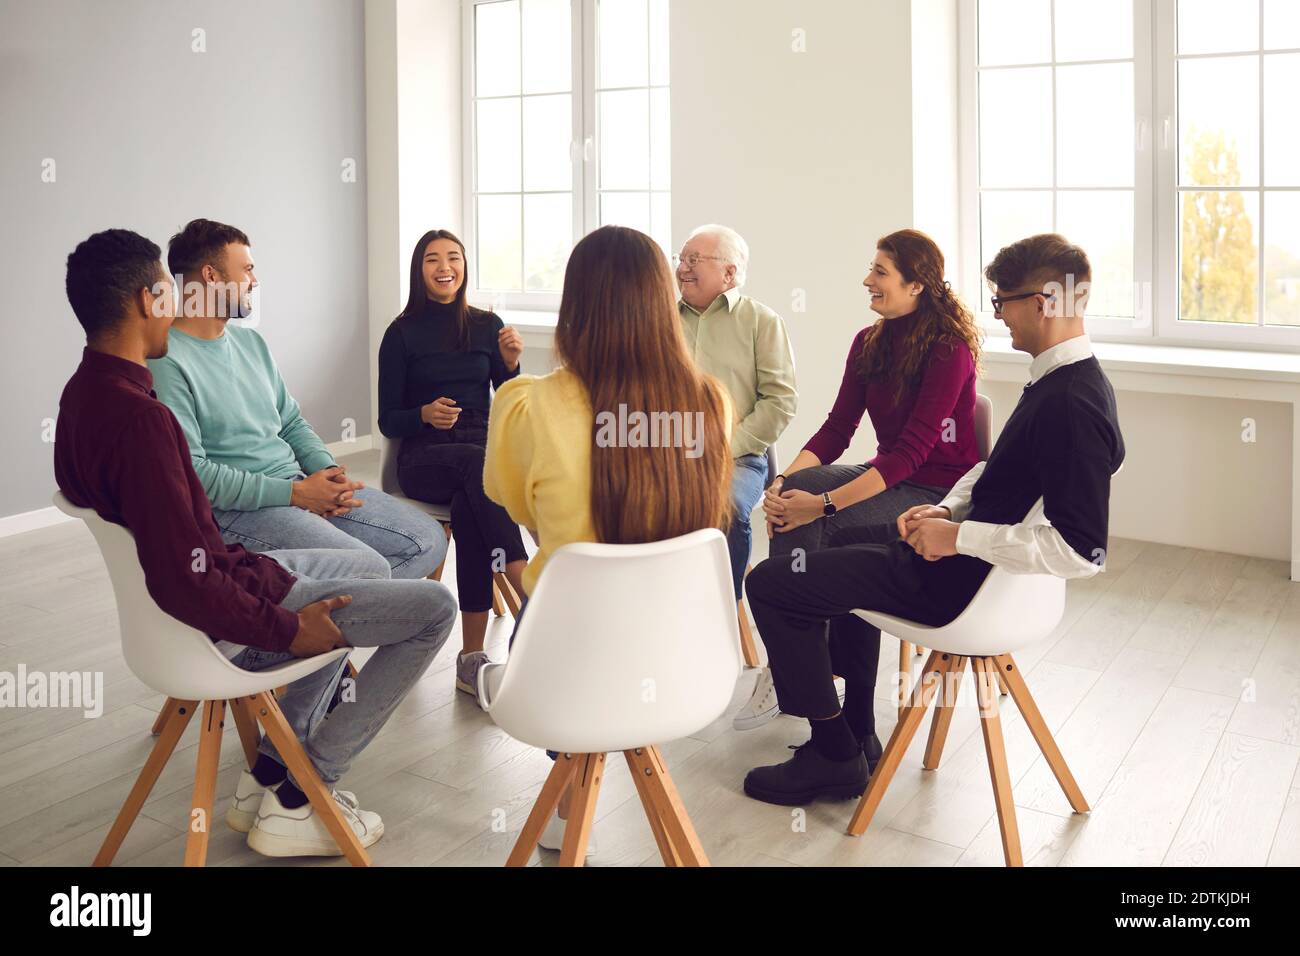 Psychological support, cooperation, teamwotk, unity, togetherness concept Stock Photo